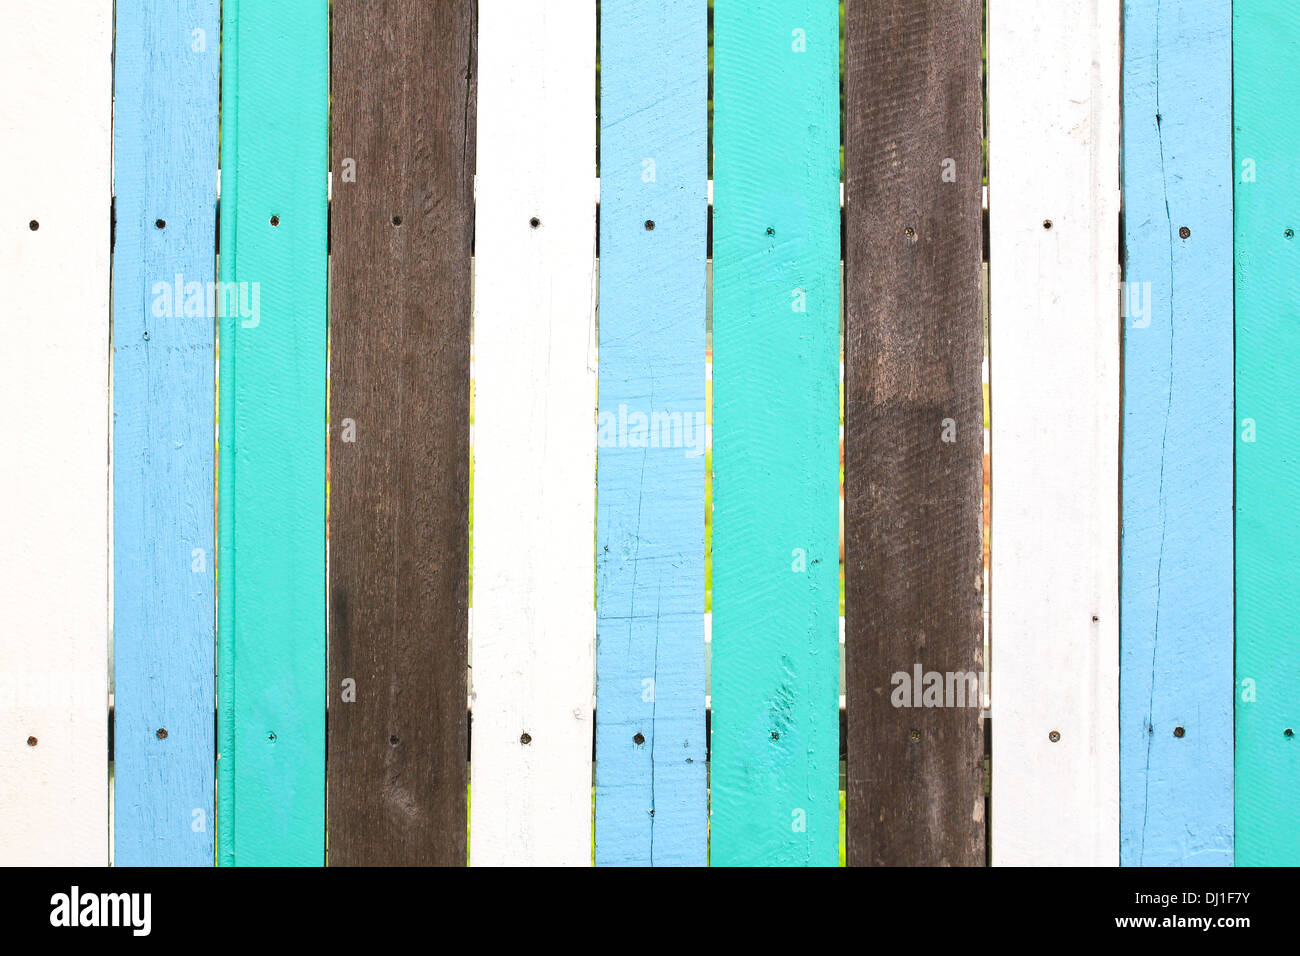 Abstract grunge wood stripes pattern texture background colorful Stock Photo